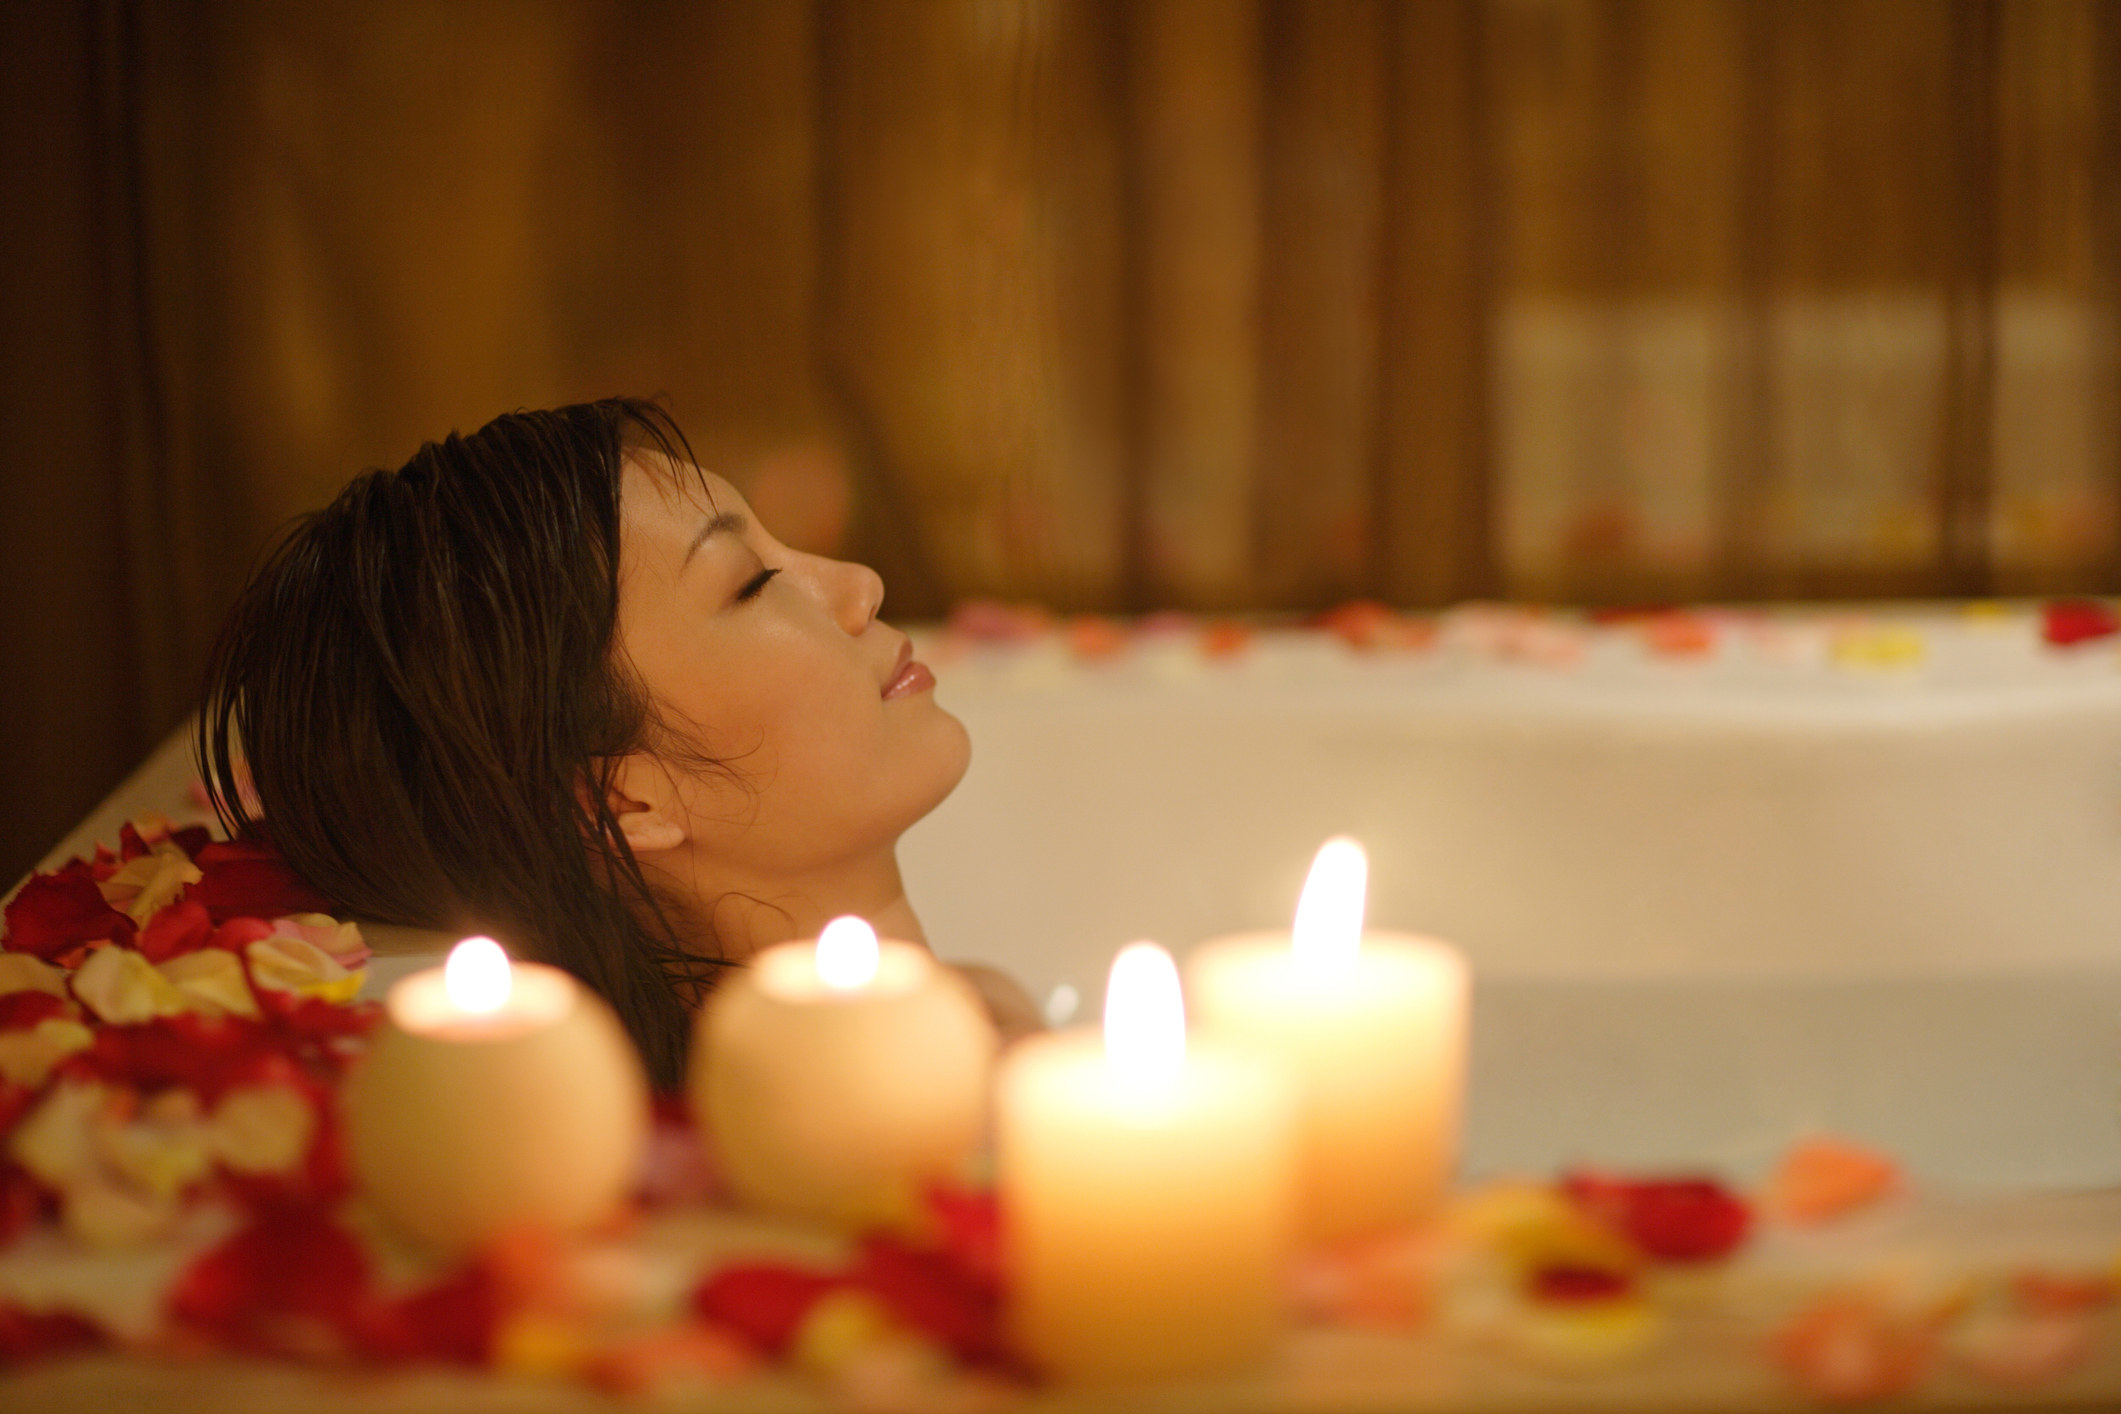 A woman in a bathtub with candles and rose petals